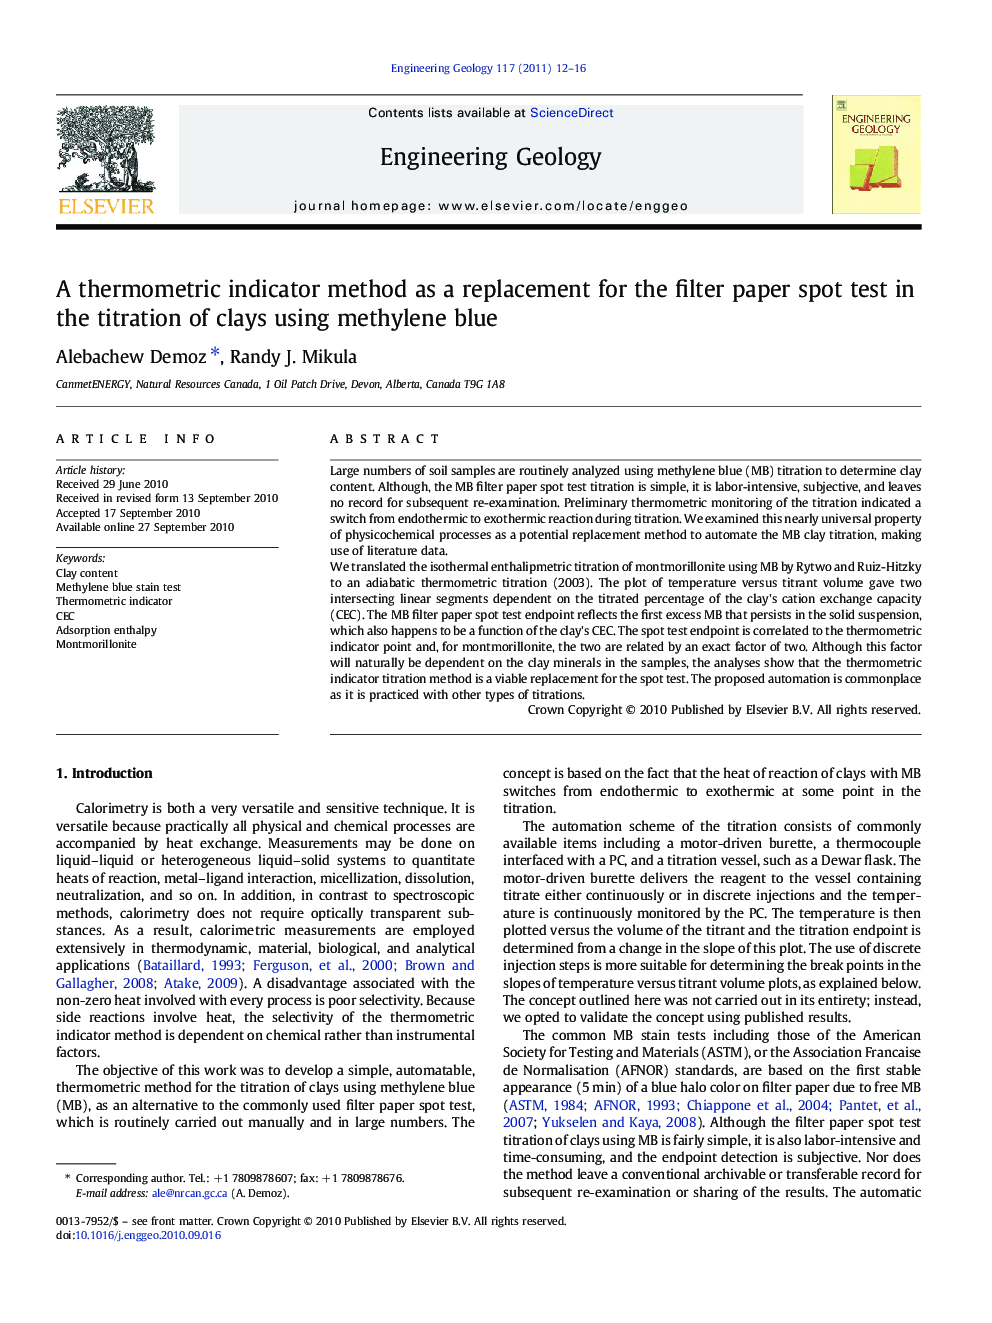 A thermometric indicator method as a replacement for the filter paper spot test in the titration of clays using methylene blue